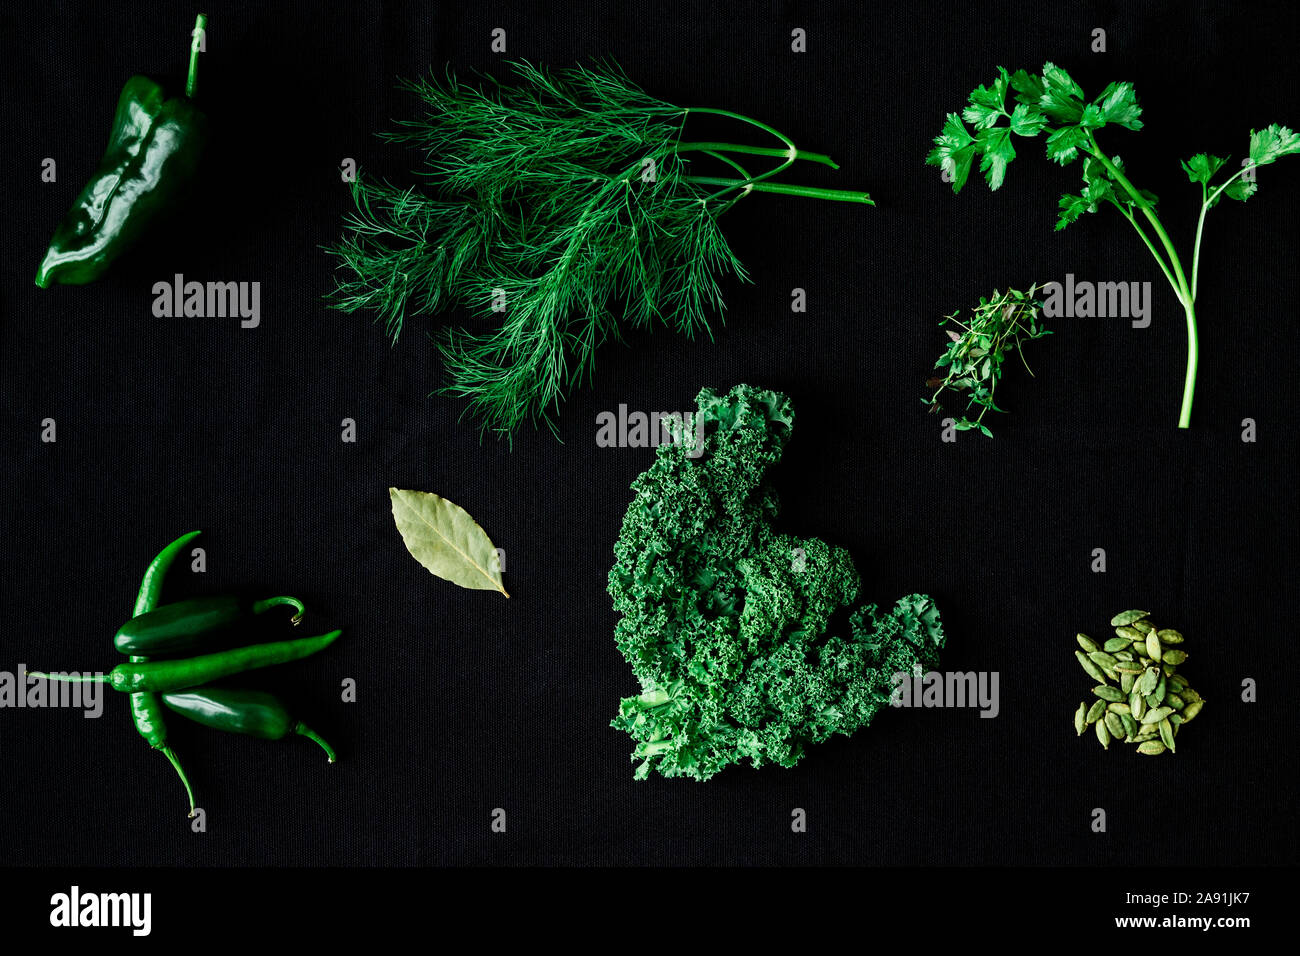 Herbs and spices on black background Stock Photo